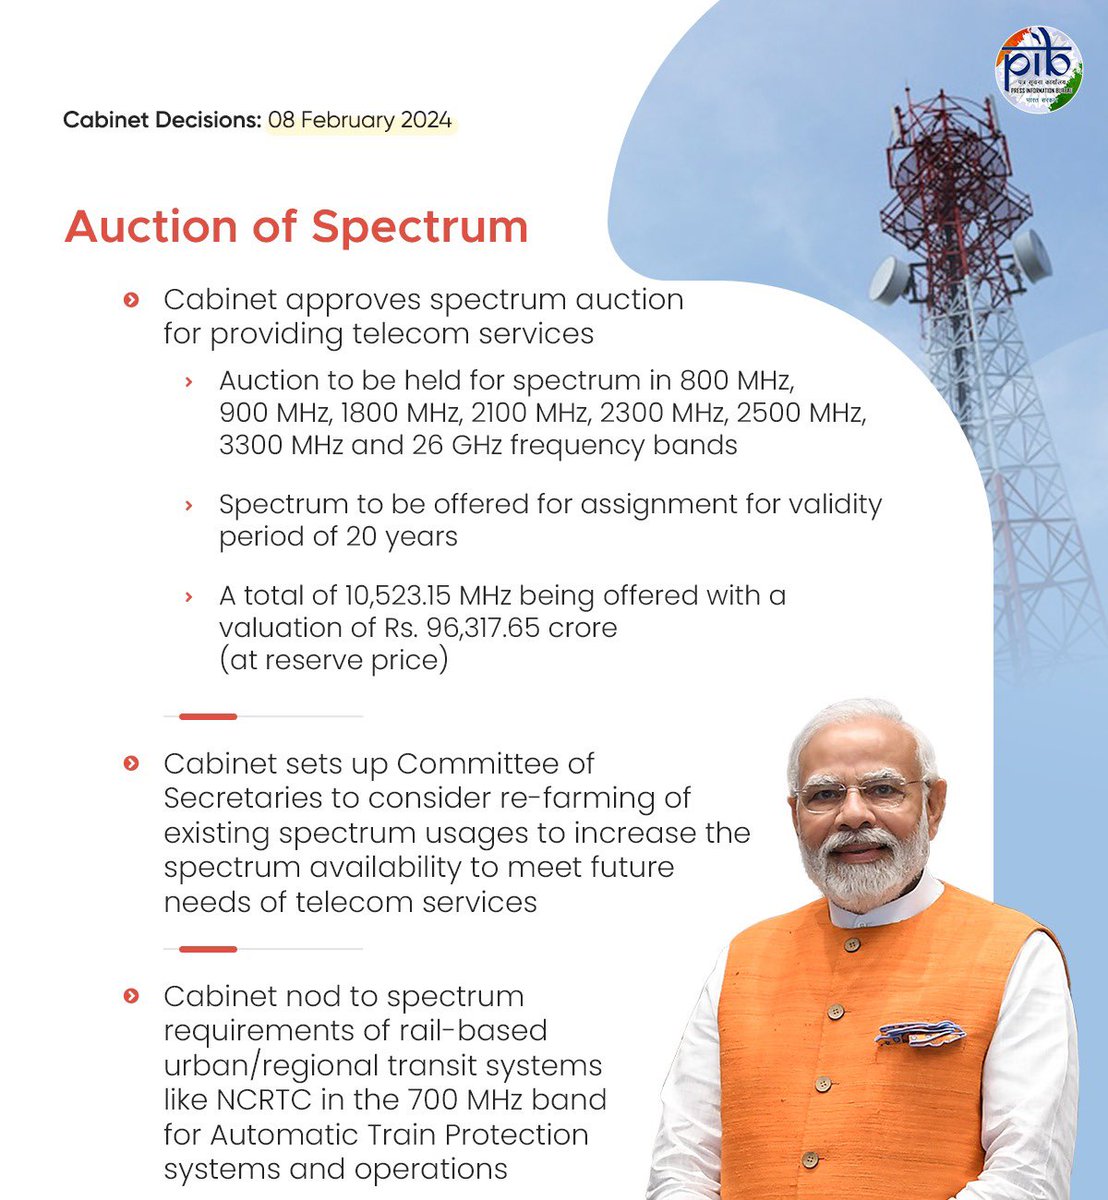 #Cabinet approves proposal of @DoT_India to conduct #SpectrumAuction for providing telecom services. Additional spectrum will improve the quality of telecom services and coverage for the consumers.

#cabinetbriefing #CabinetDecisions